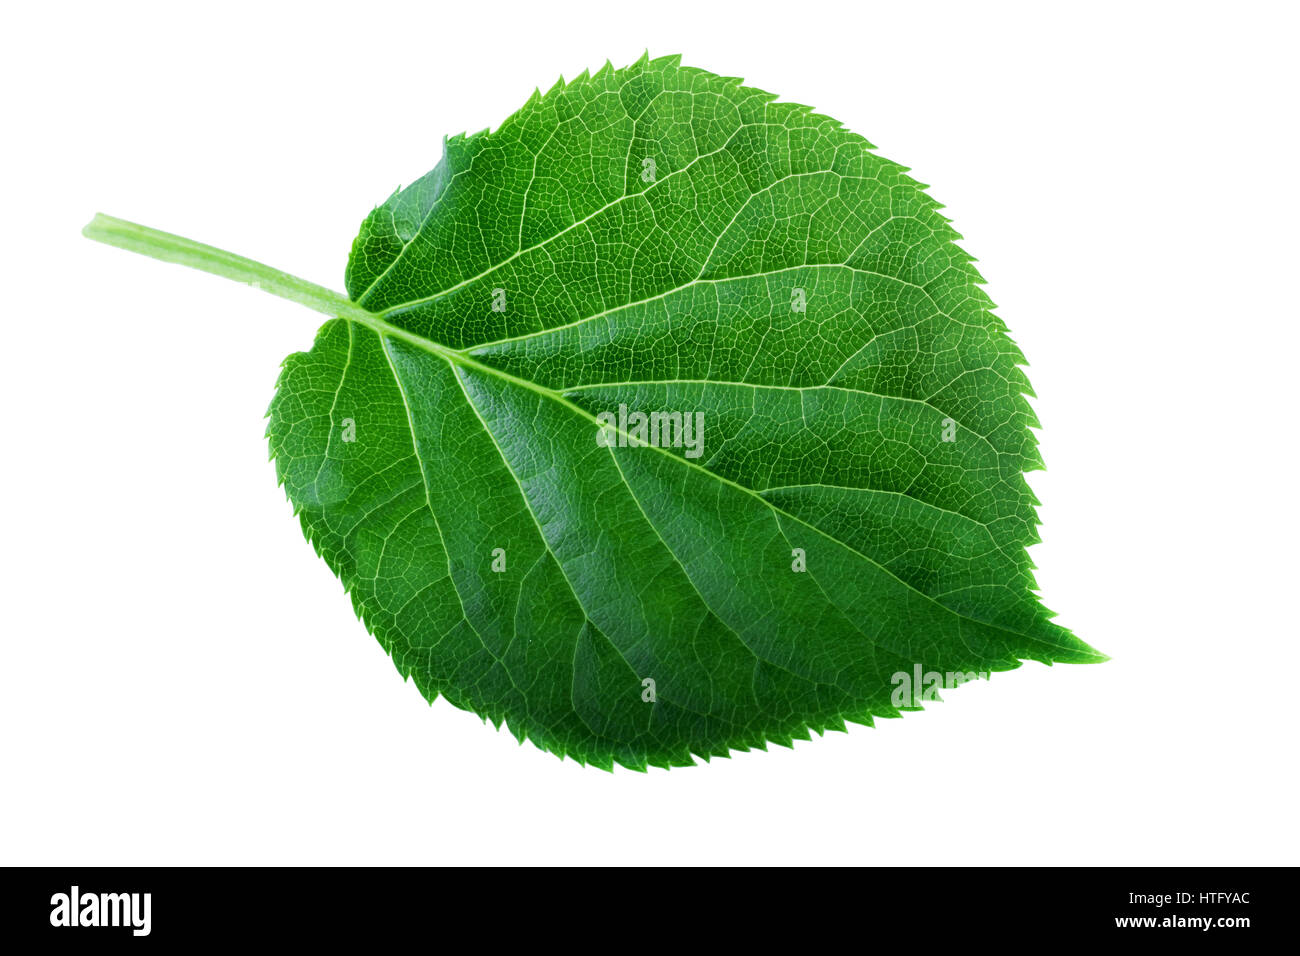 Green leaf isolated on white. Leaf structure and spring nature concept Stock Photo